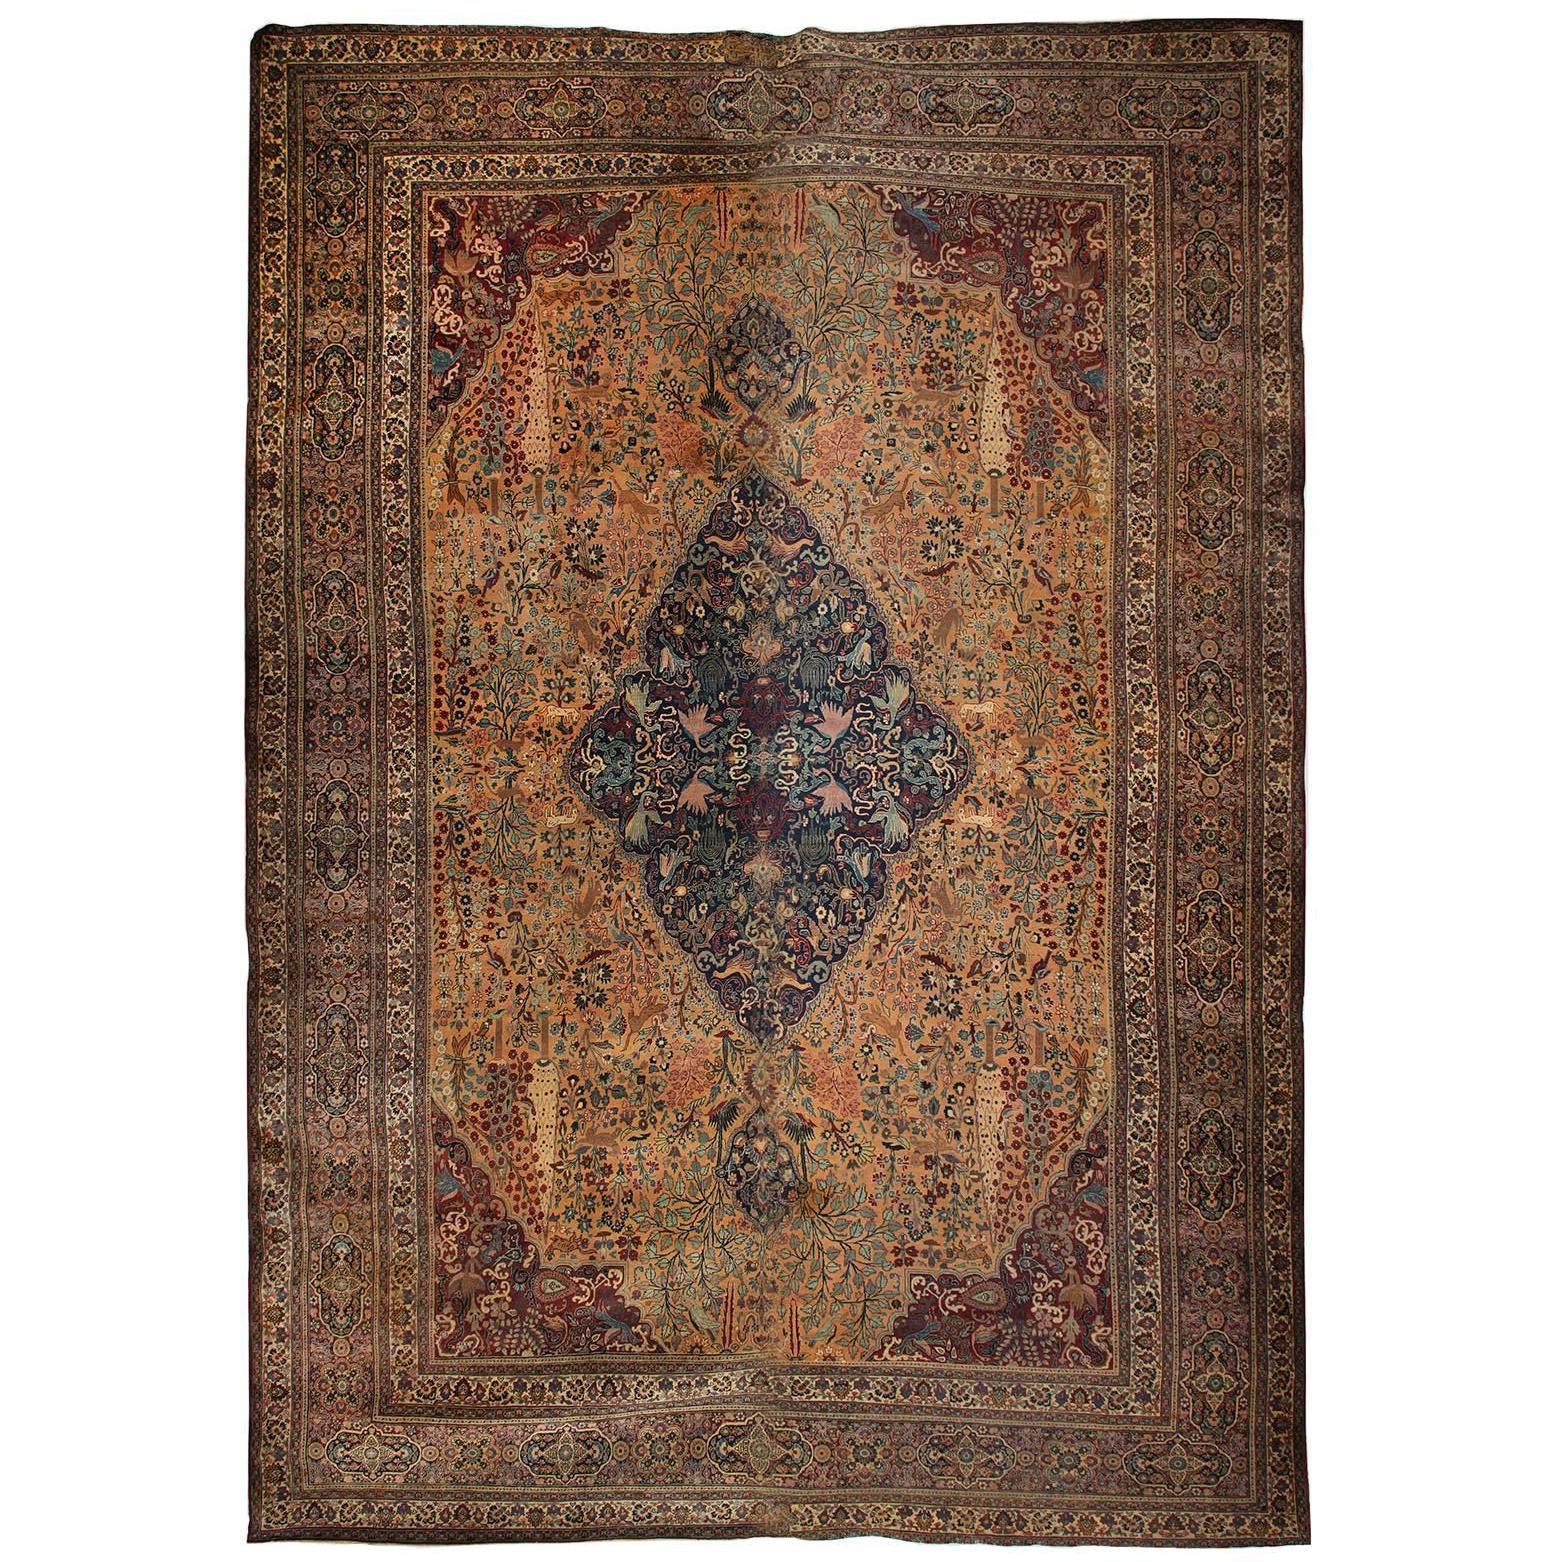 Antique 1870s Persian Tabriz Rug Woven by Order of Prince Shahrukh Mirza, 13x21 For Sale